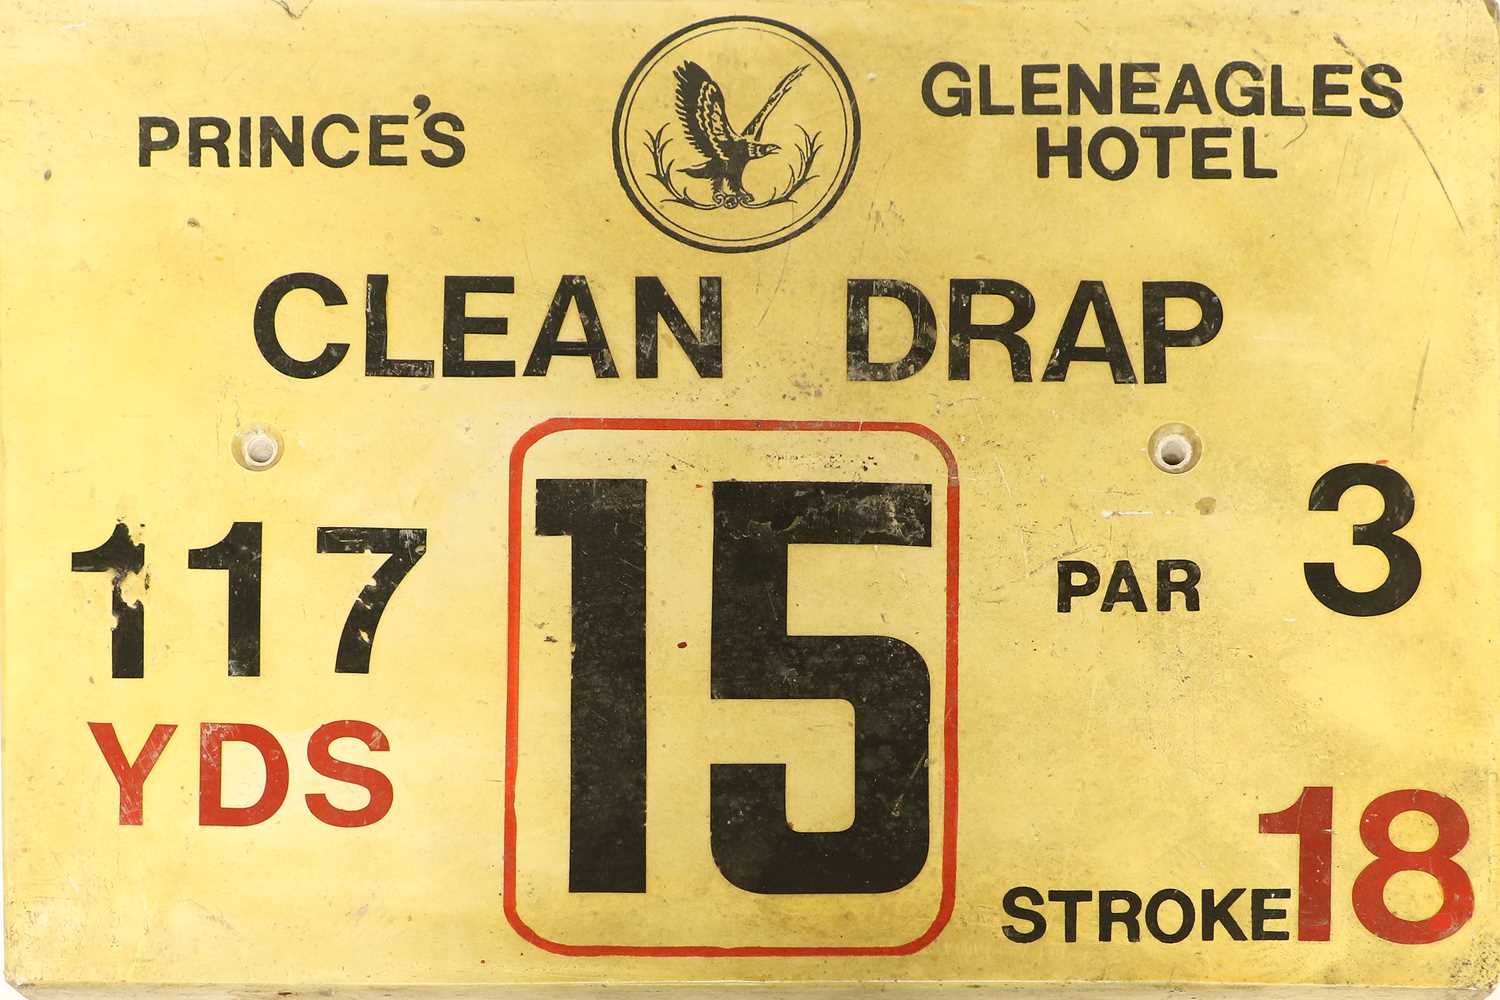 Golf Plaques A Full Set From Gleneagles Hotel Princes's Course - Image 14 of 19